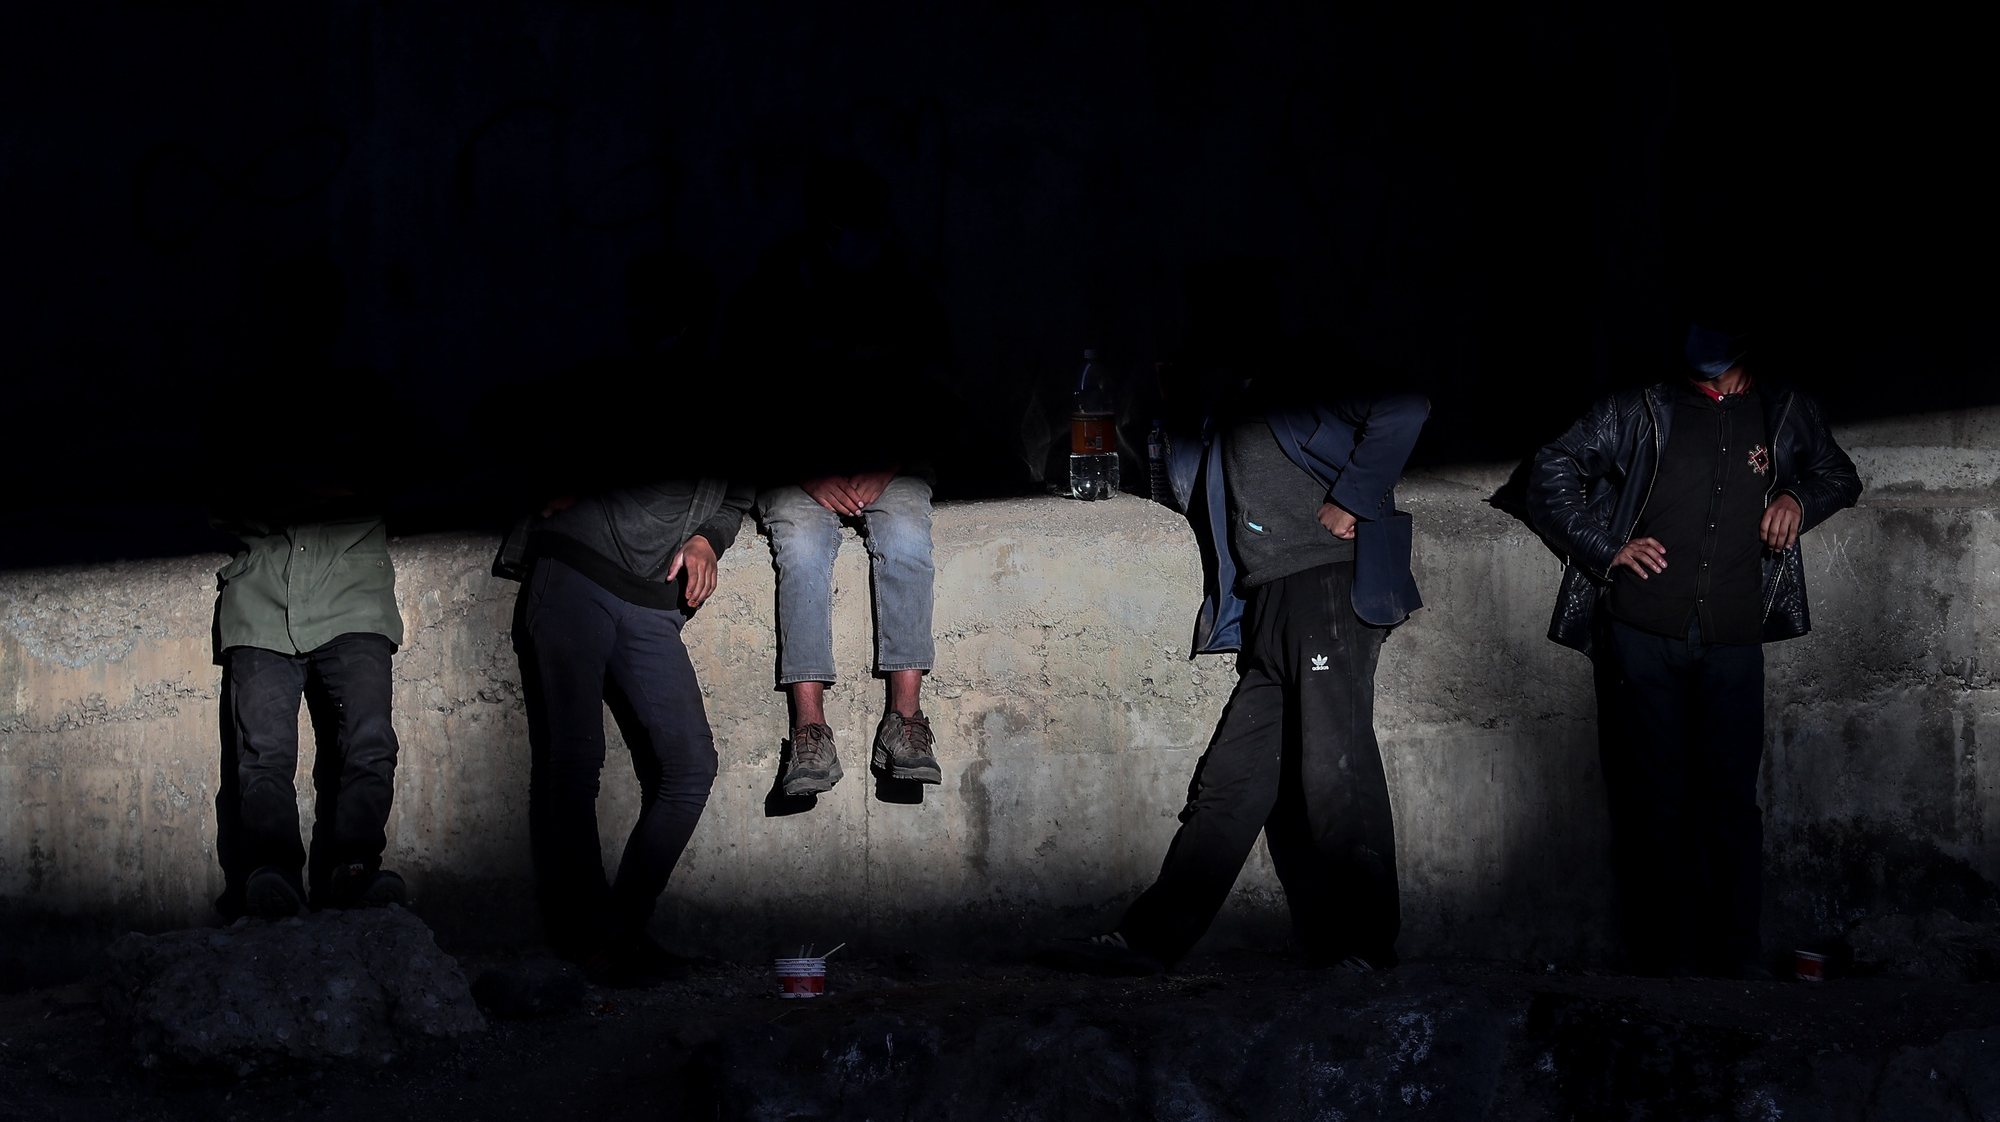 epaselect epa09323135 (28/33) A group of people rest under a bridge near a railway in the Turkish city of Van after crossing the Iran-Turkey border, 02 June 2021. People smuggled into the country wait for days to be transferred by smugglers to Diyarbakir city to reach west Turkey. The city of Van, on the Turkish-Iranian border, is one of the points at which human smuggling can be easily spotted. Smugglers charge between 600 or 1,000 US dollars per person, depending on the security situation at the border.  EPA/SEDAT SUNA ATTENTION: For the full PHOTO ESSAY text please see Advisory Notices epa09323103 and epa09323104